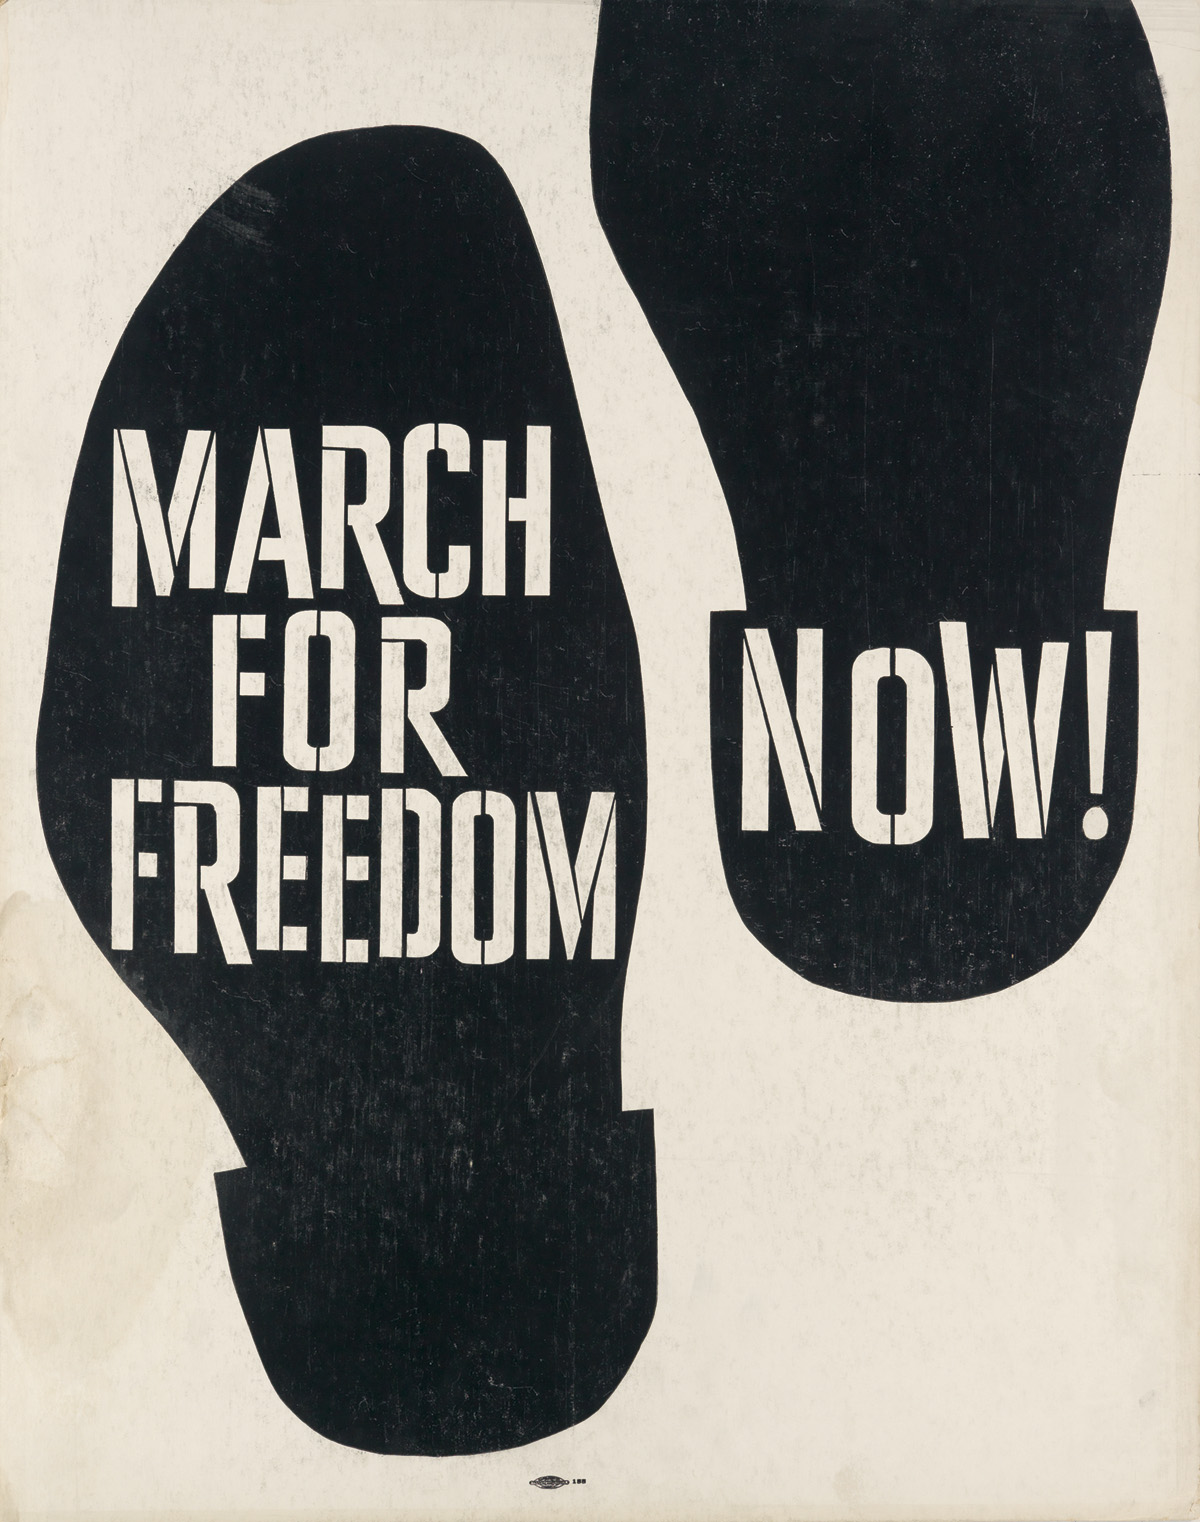 (CIVIL RIGHTS.) March for Freedom Now!